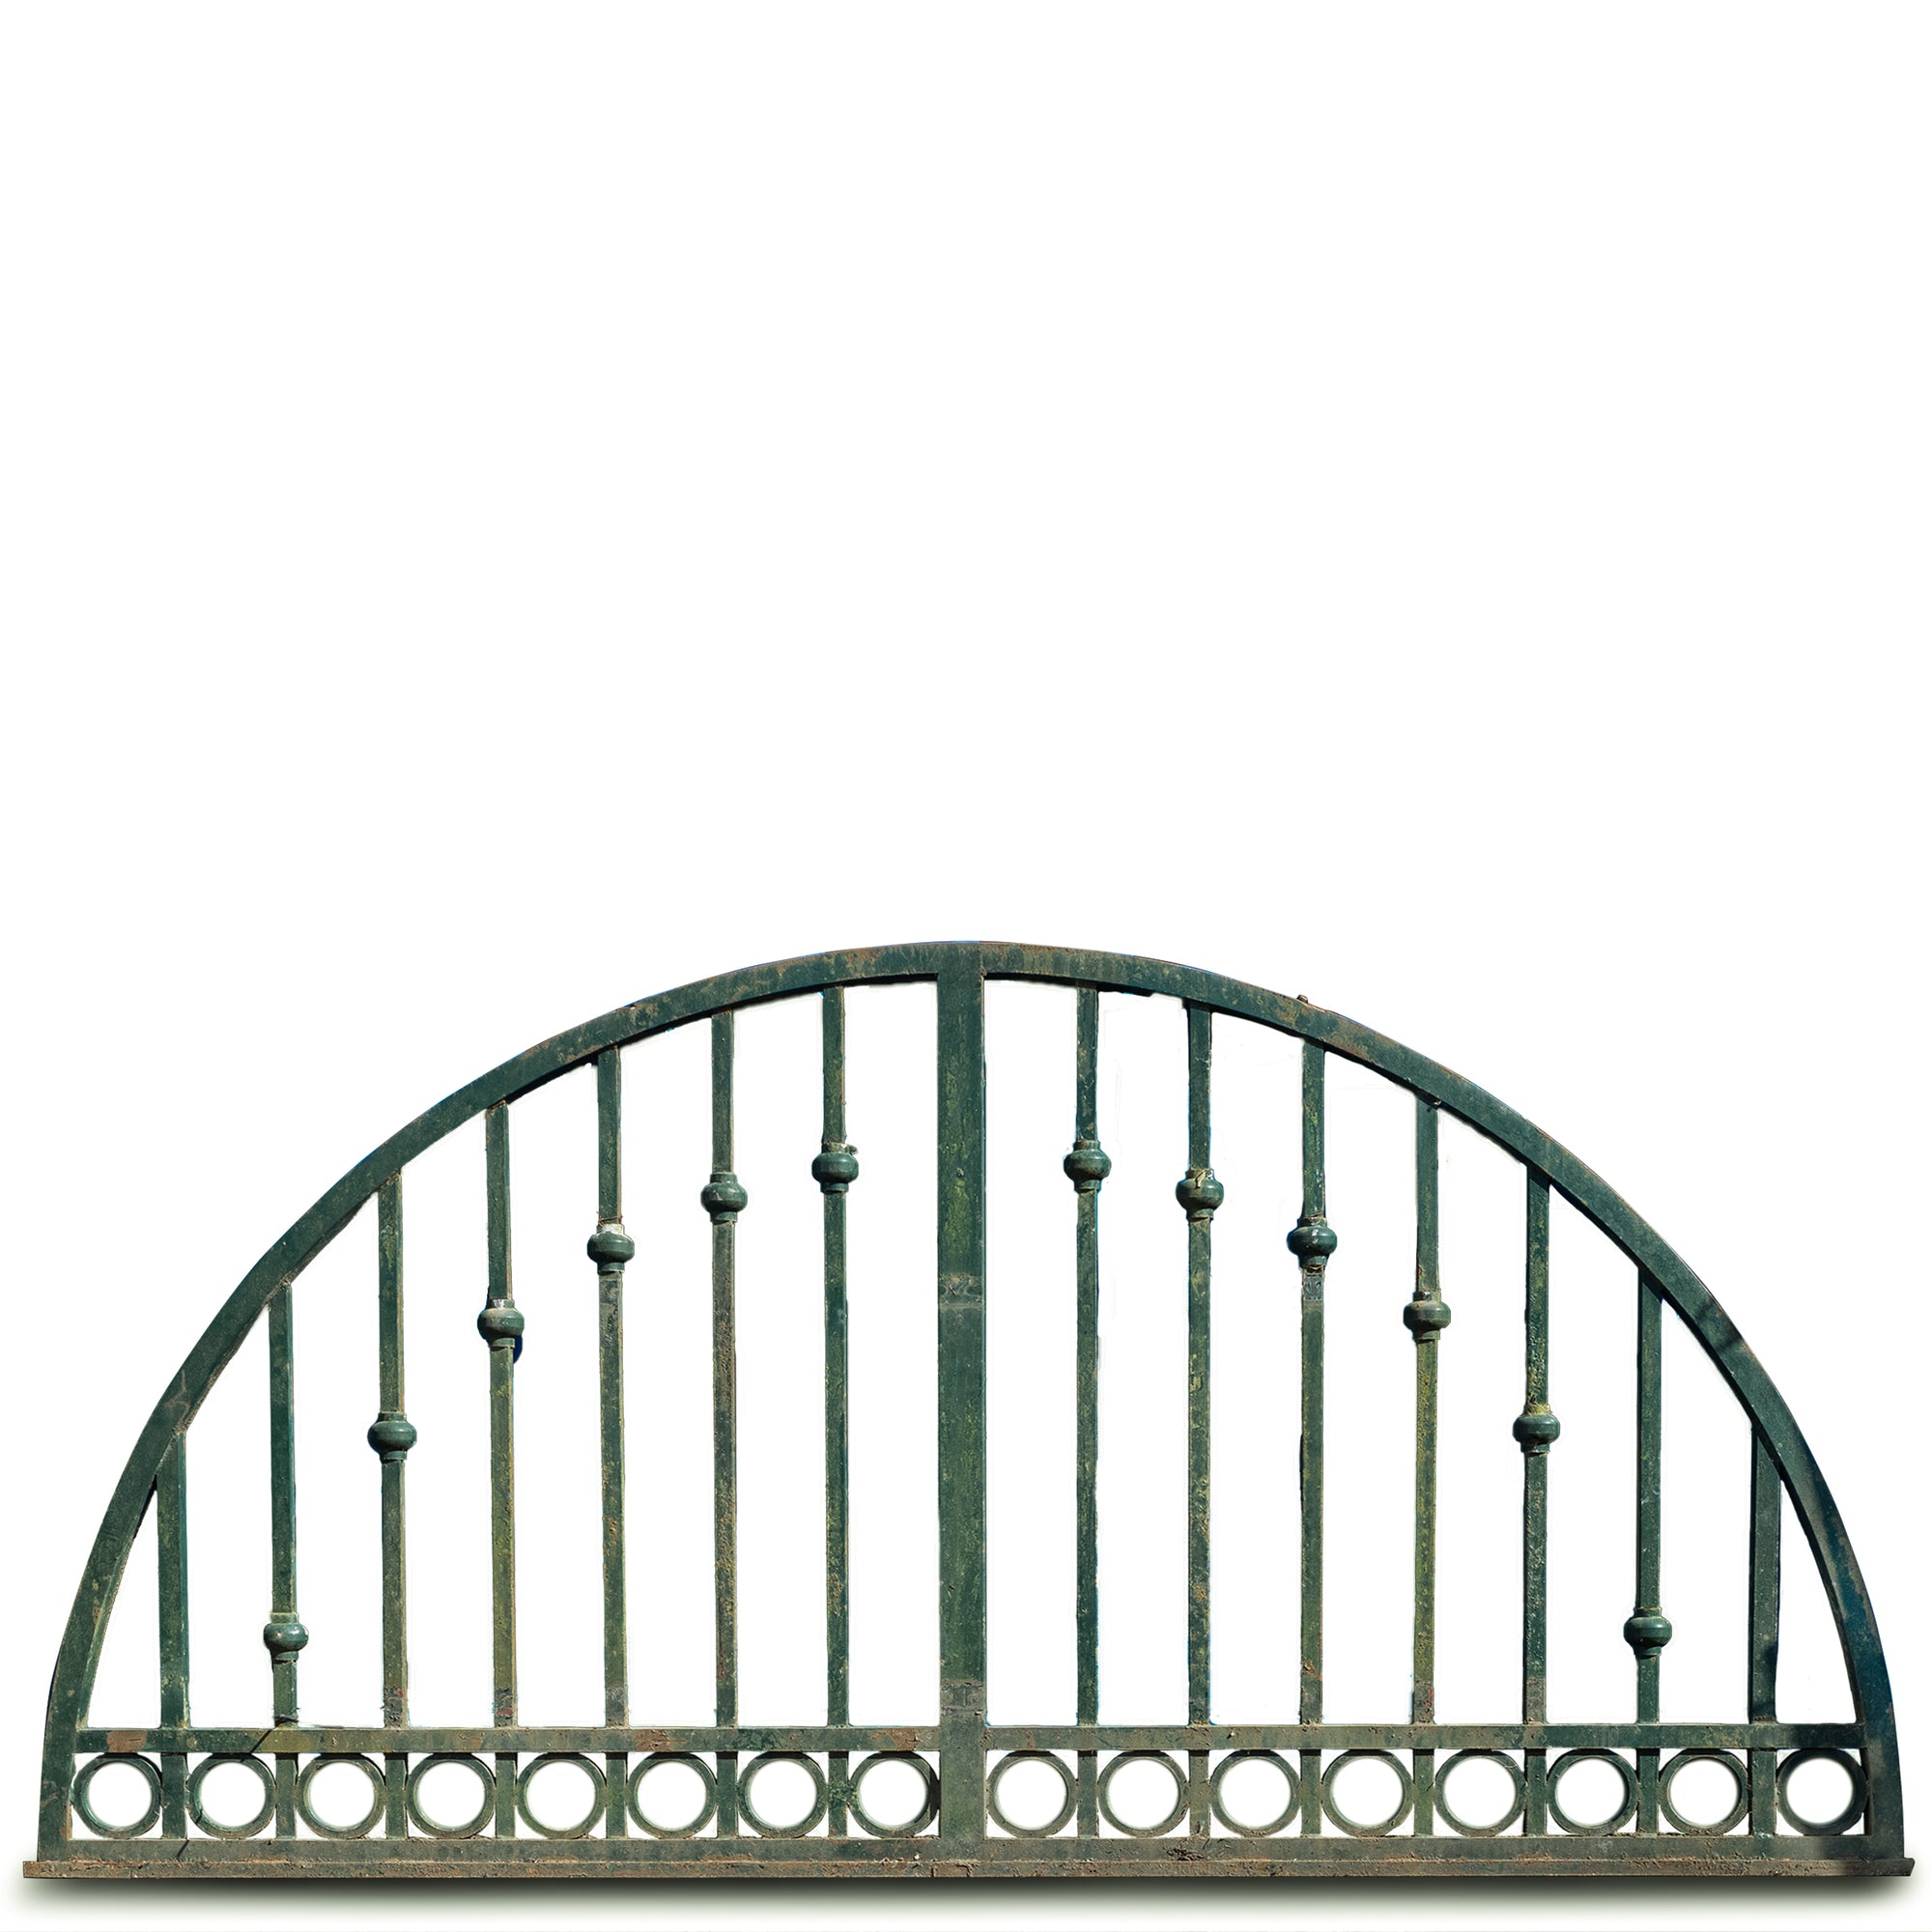 Antique Art Deco Iron Gates with Optional Arched Crest (2 Pairs Available) | The Architectural Forum